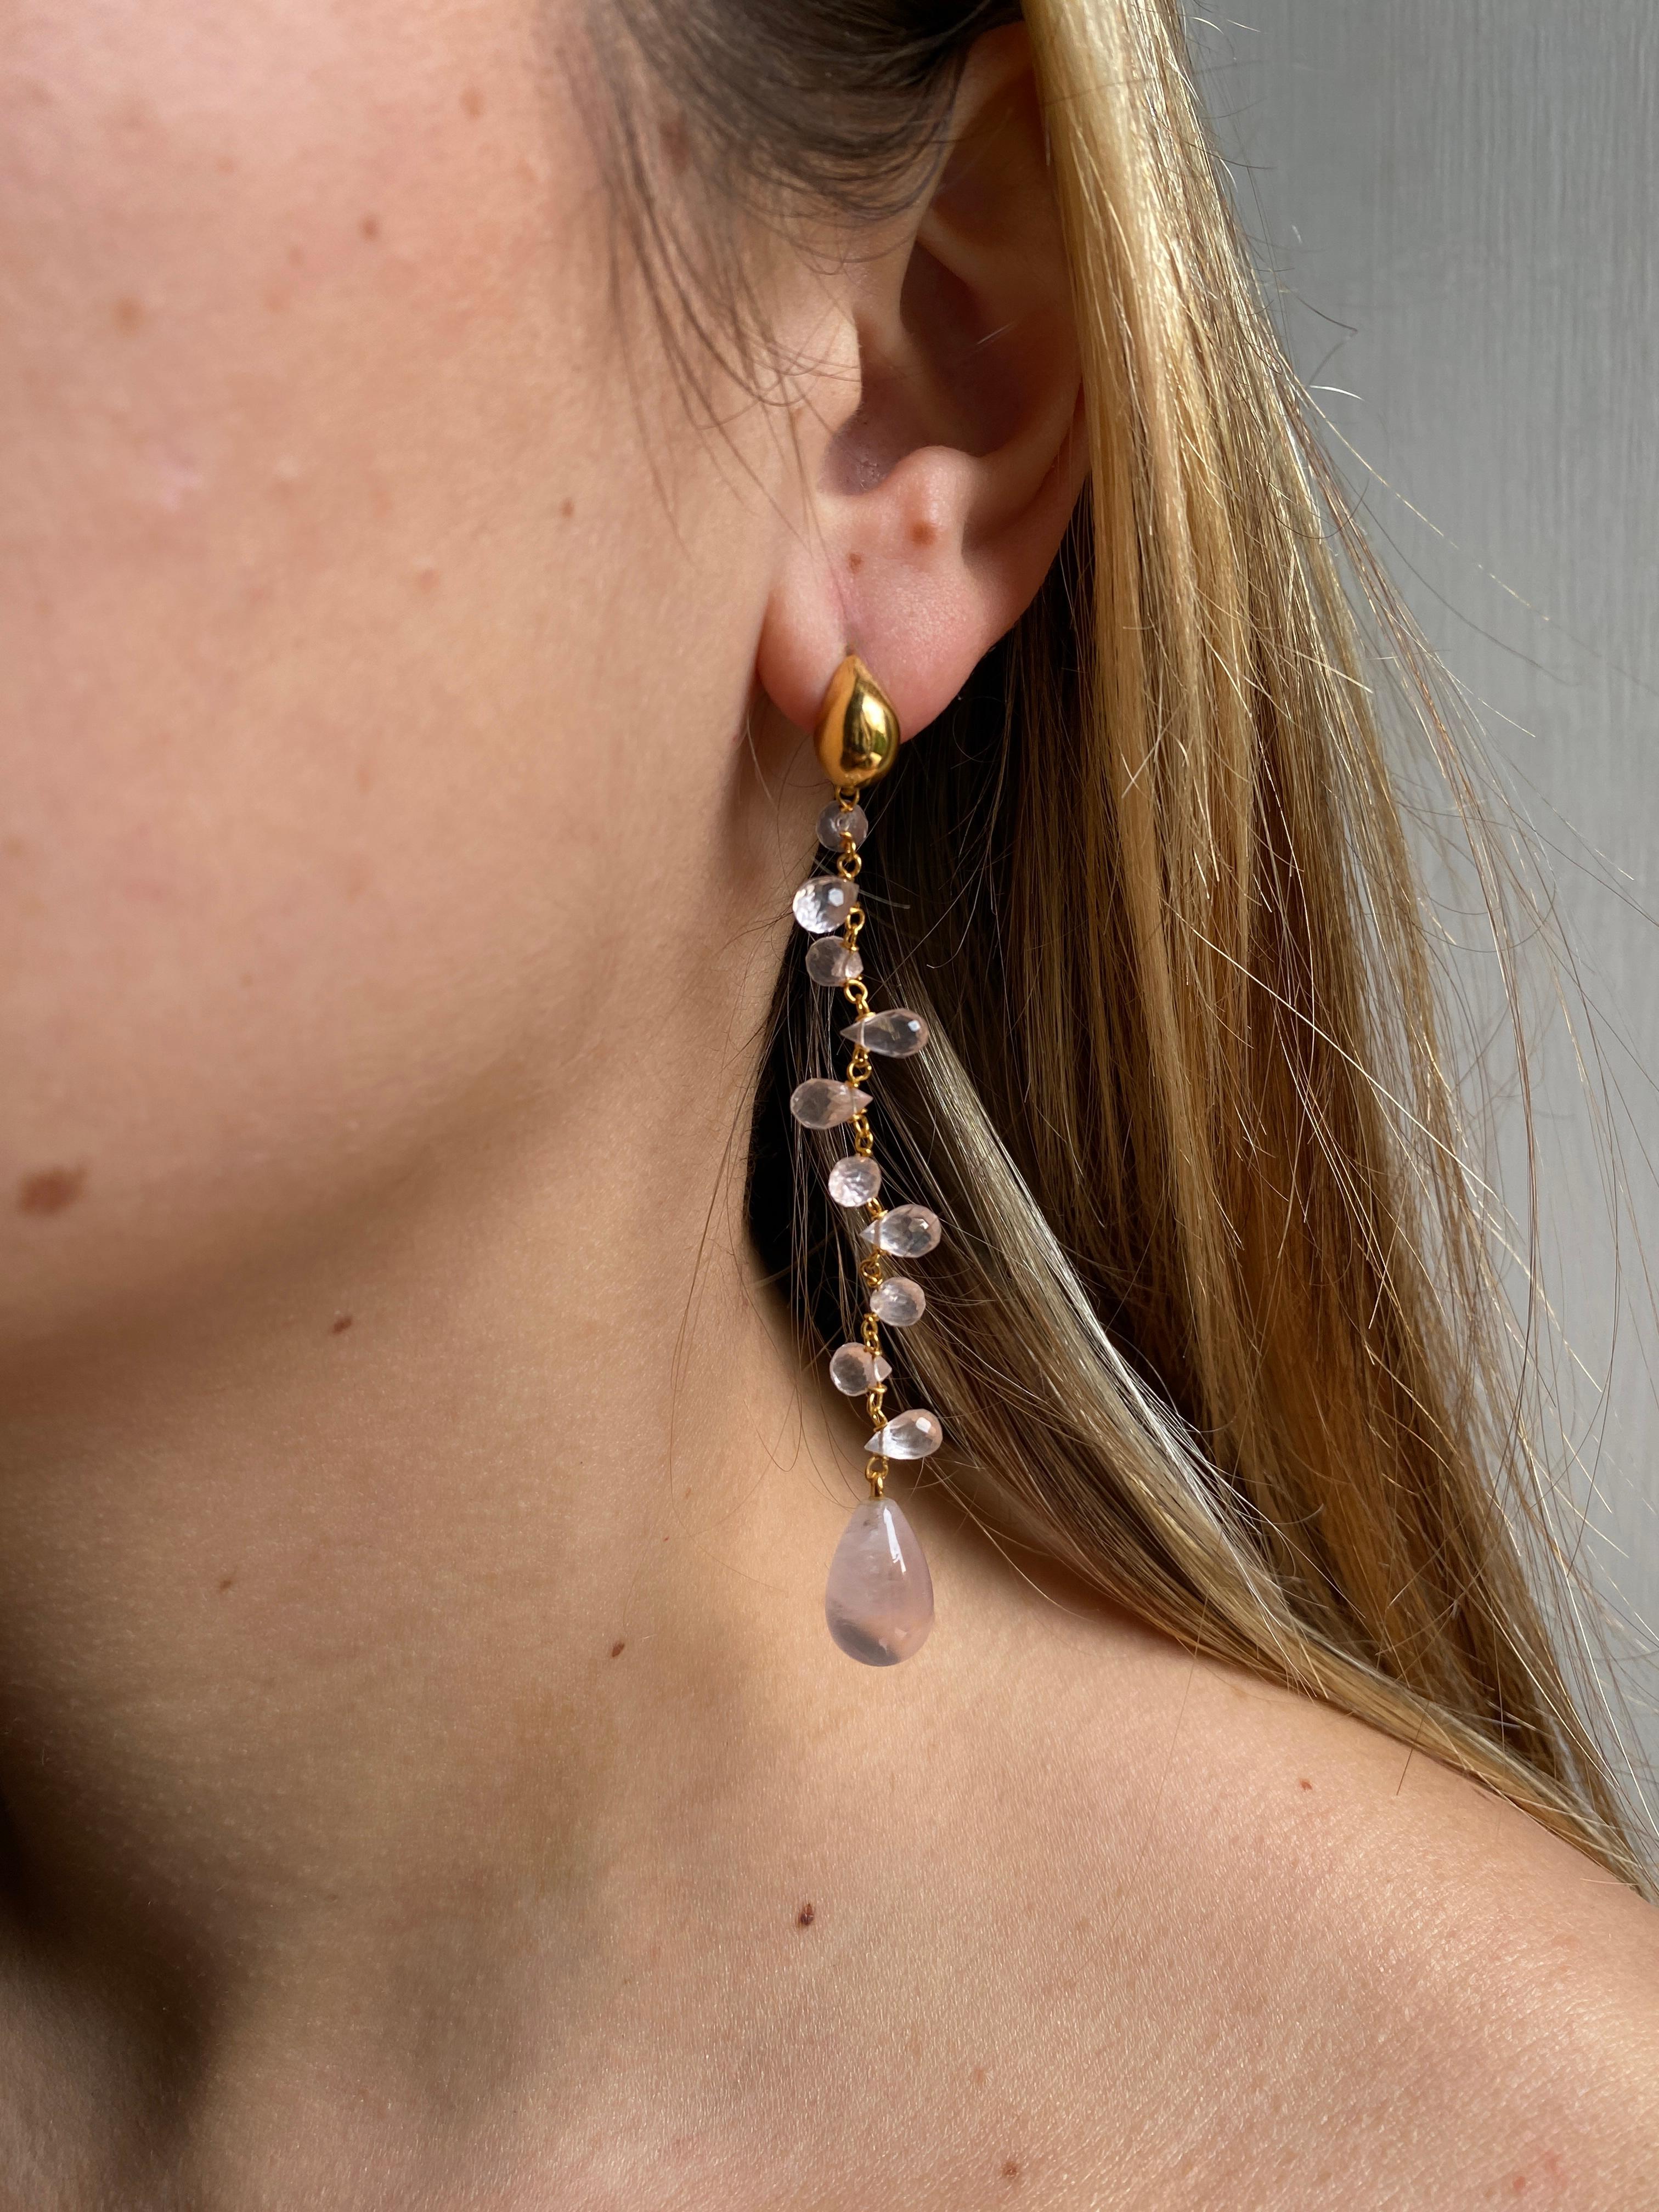 Introducing Rossella Ugolini's Delicate Unique Jointed Earrings in 18k Gold and Rose Quartz, an exquisite blend of craftsmanship and elegance that transcends conventional jewelry design.

At the heart of these earrings is an 18-karat Yellow Gold